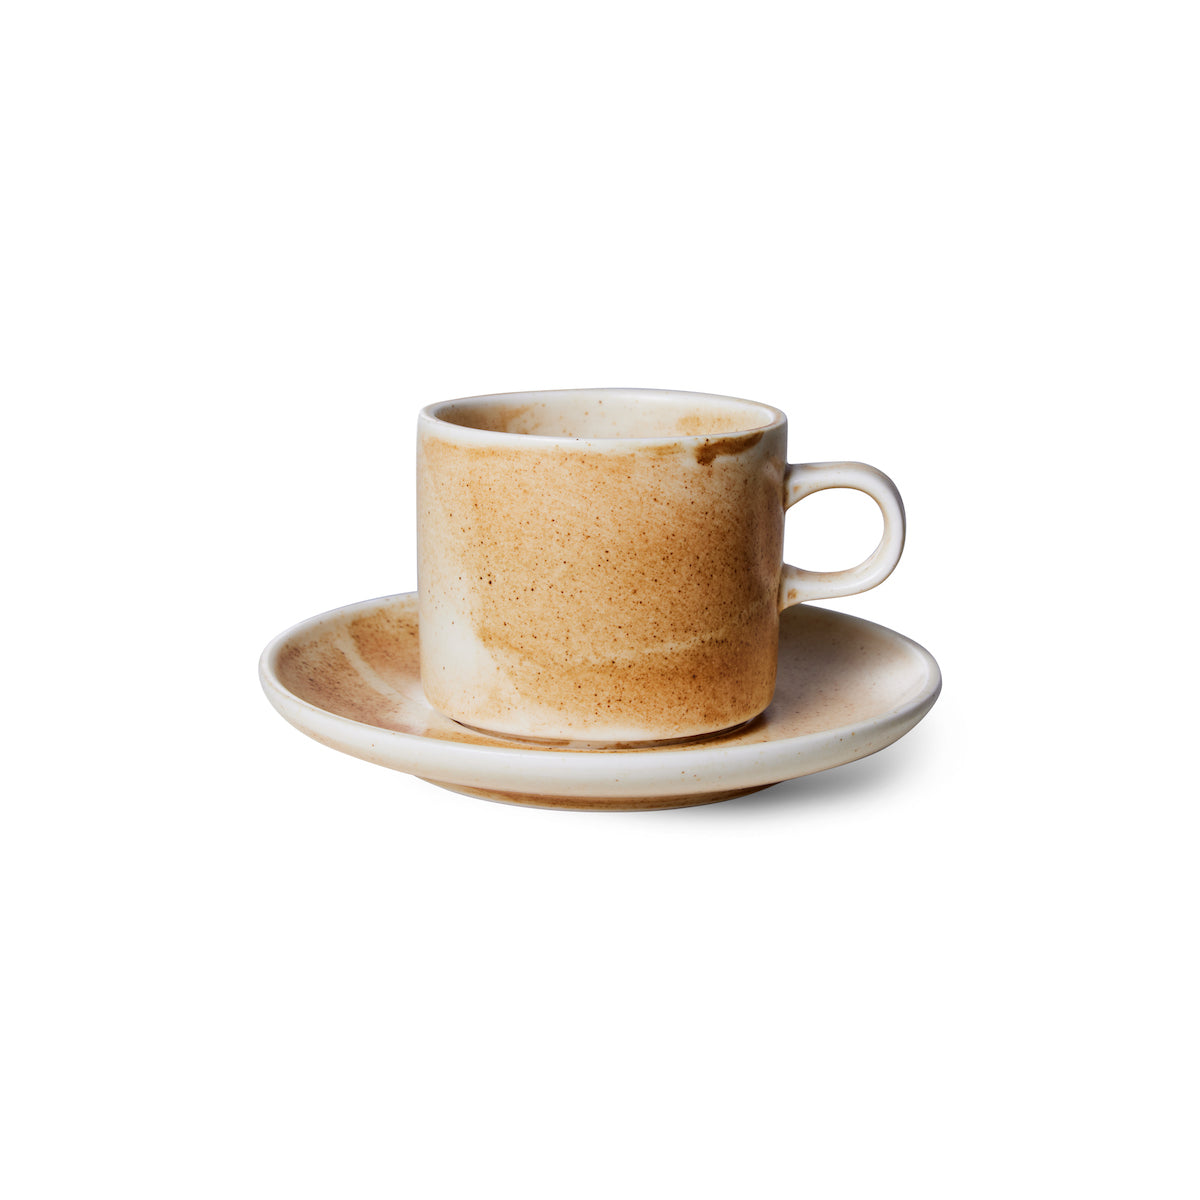 HkLiving Home Chef Ceramics: Cup & Saucer Rustic Cream & Brown